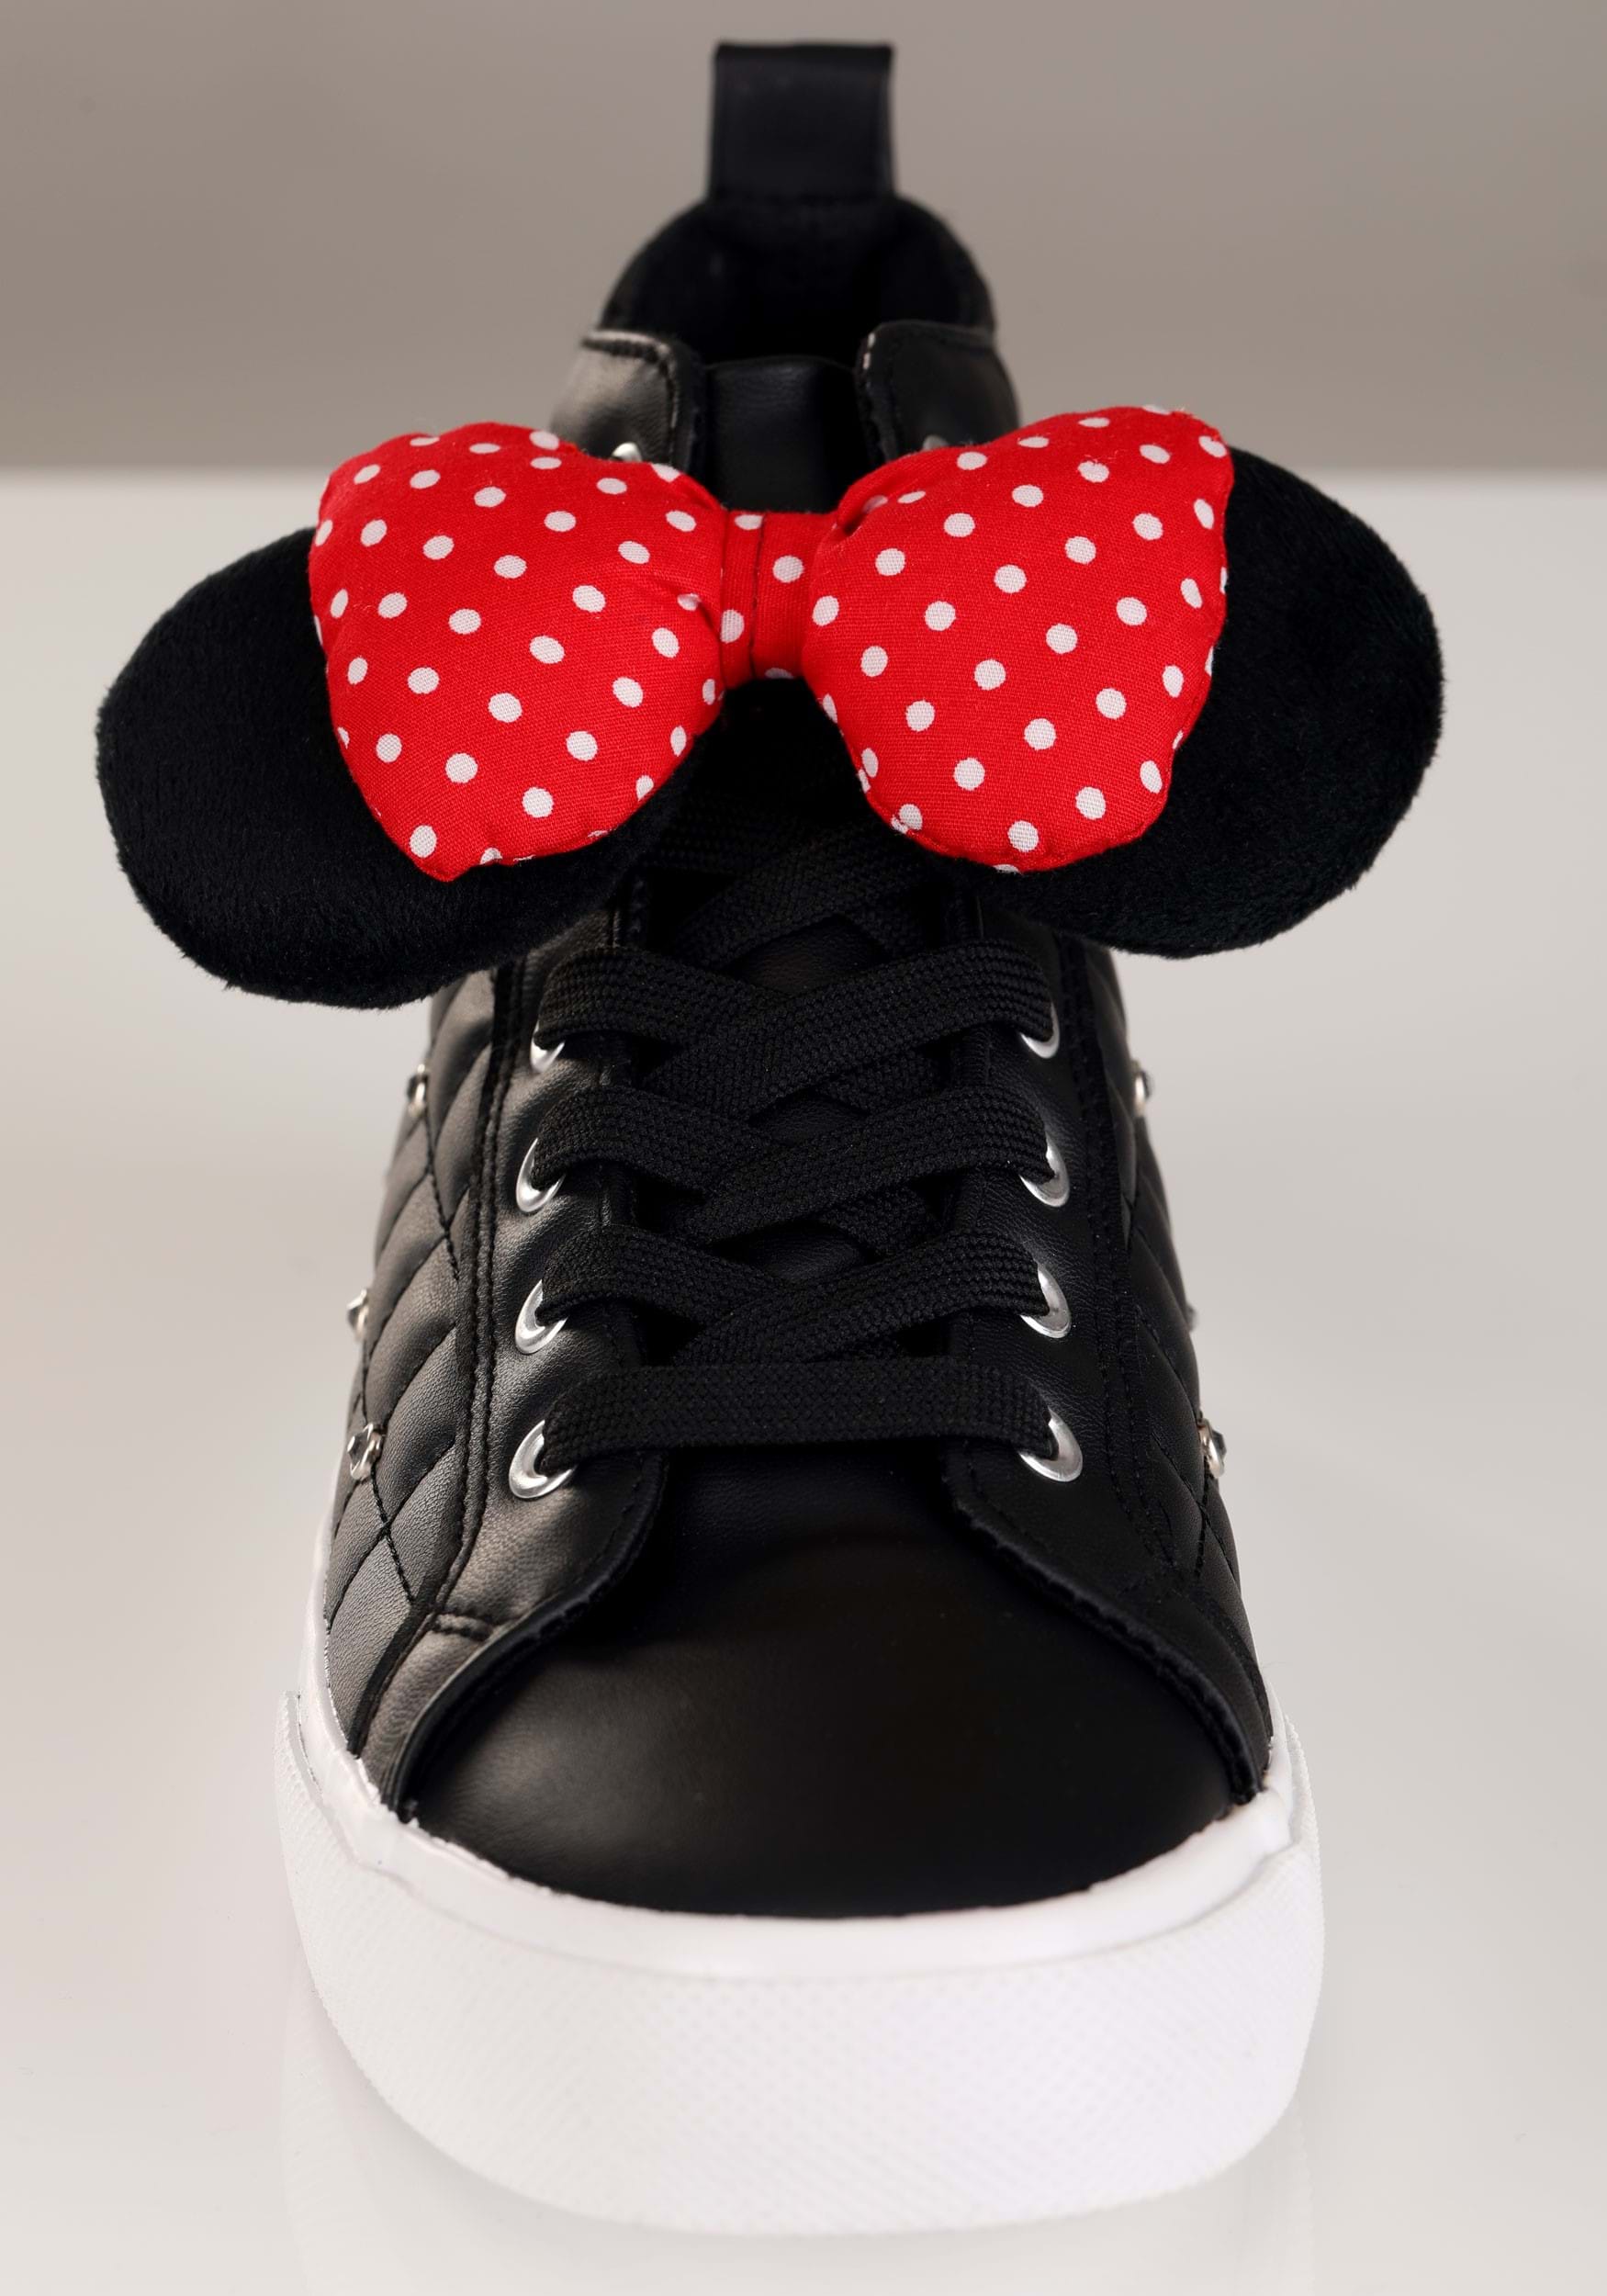 Disney Lace Up Shoes for Women - Minnie Mouse Polka Dots